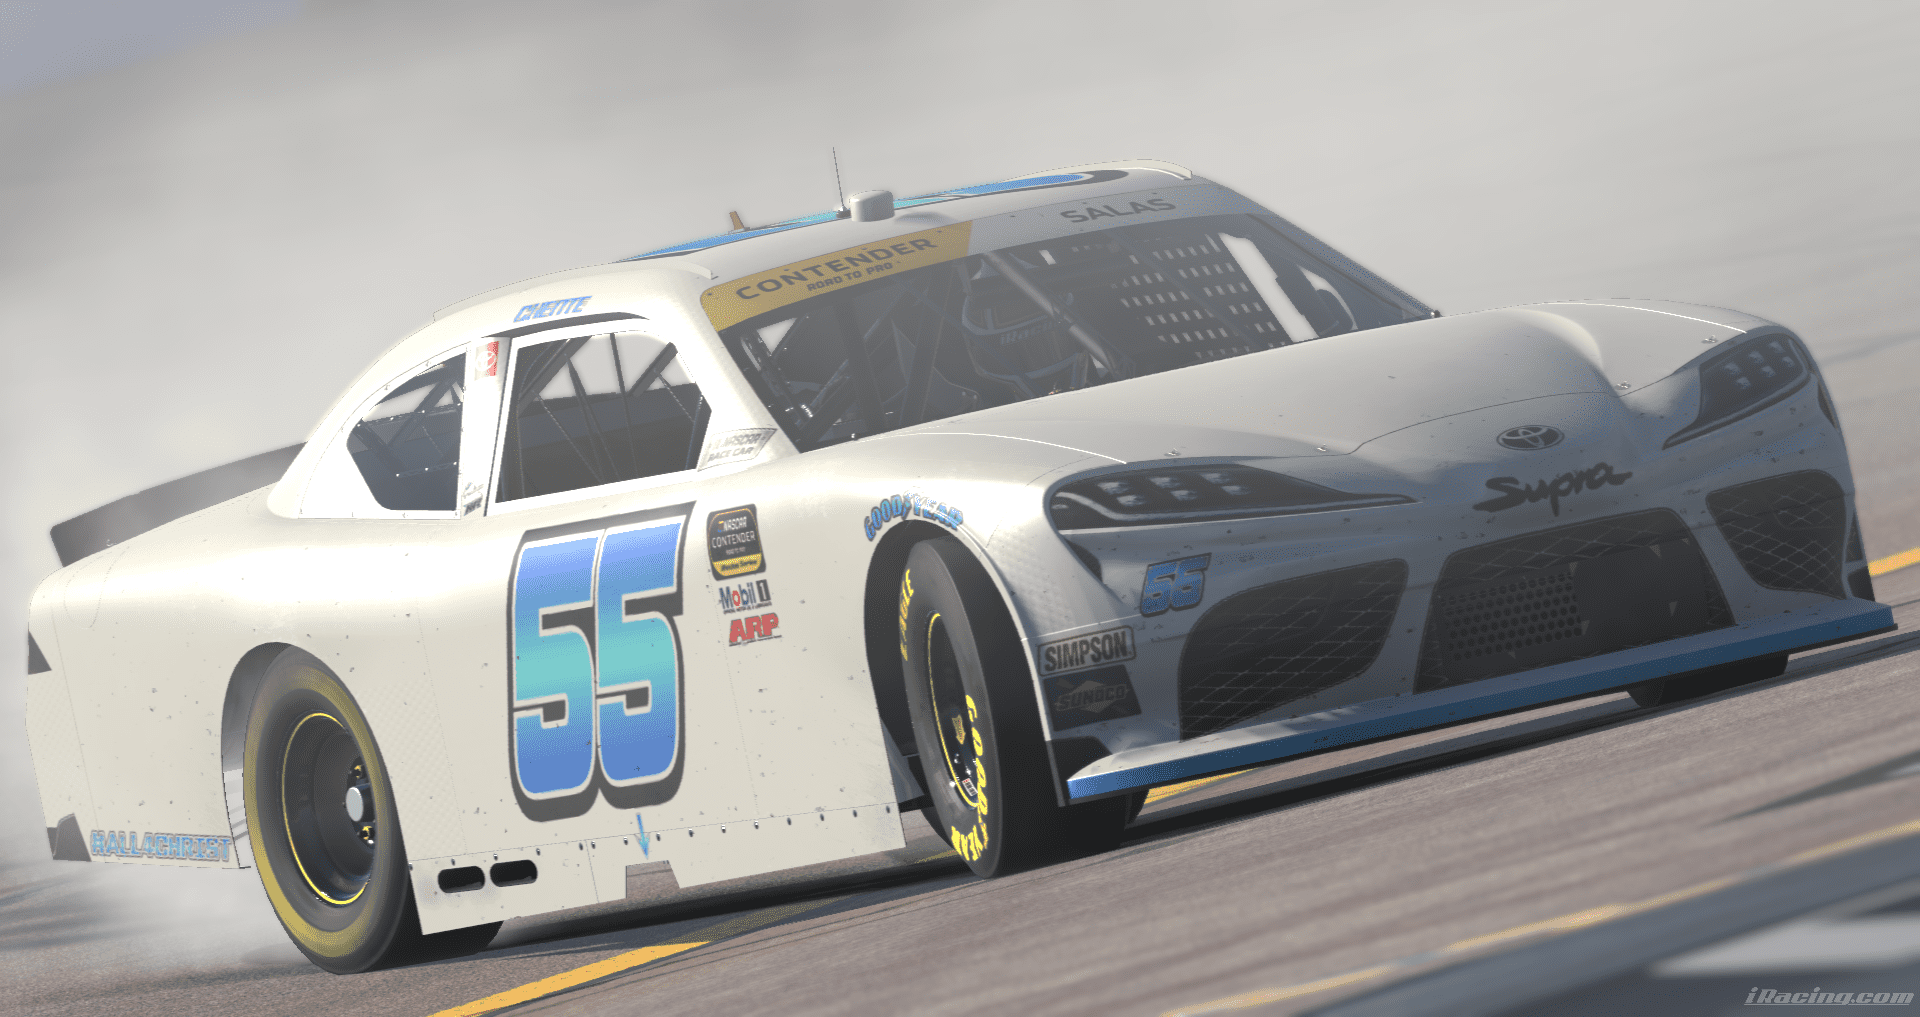 Vicente Salas takes a dominant win in the eNASCAR iRacing Contender Series at Phoenix Raceway.